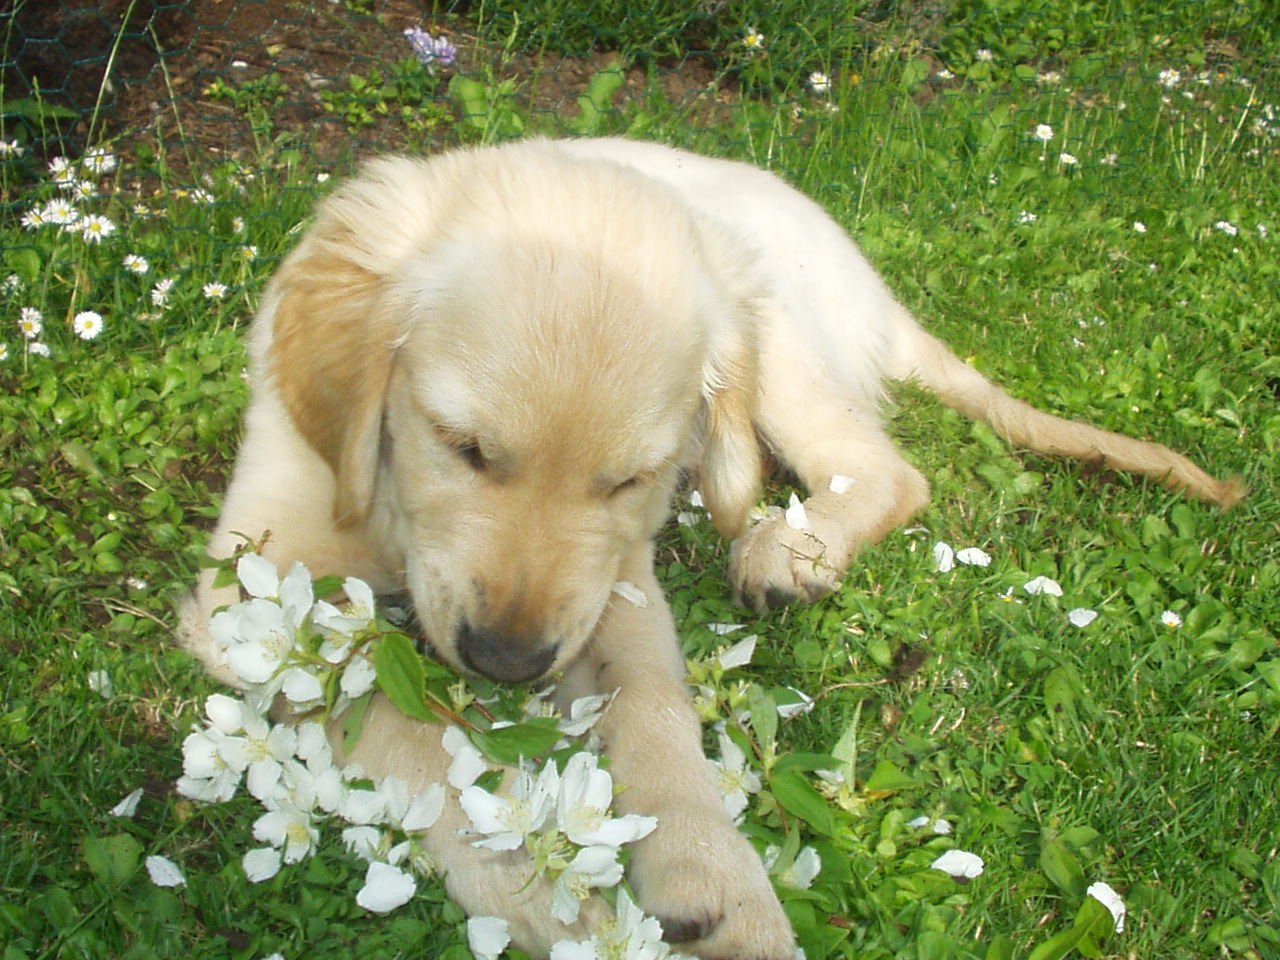 a white dog smelling some flowers in the grass